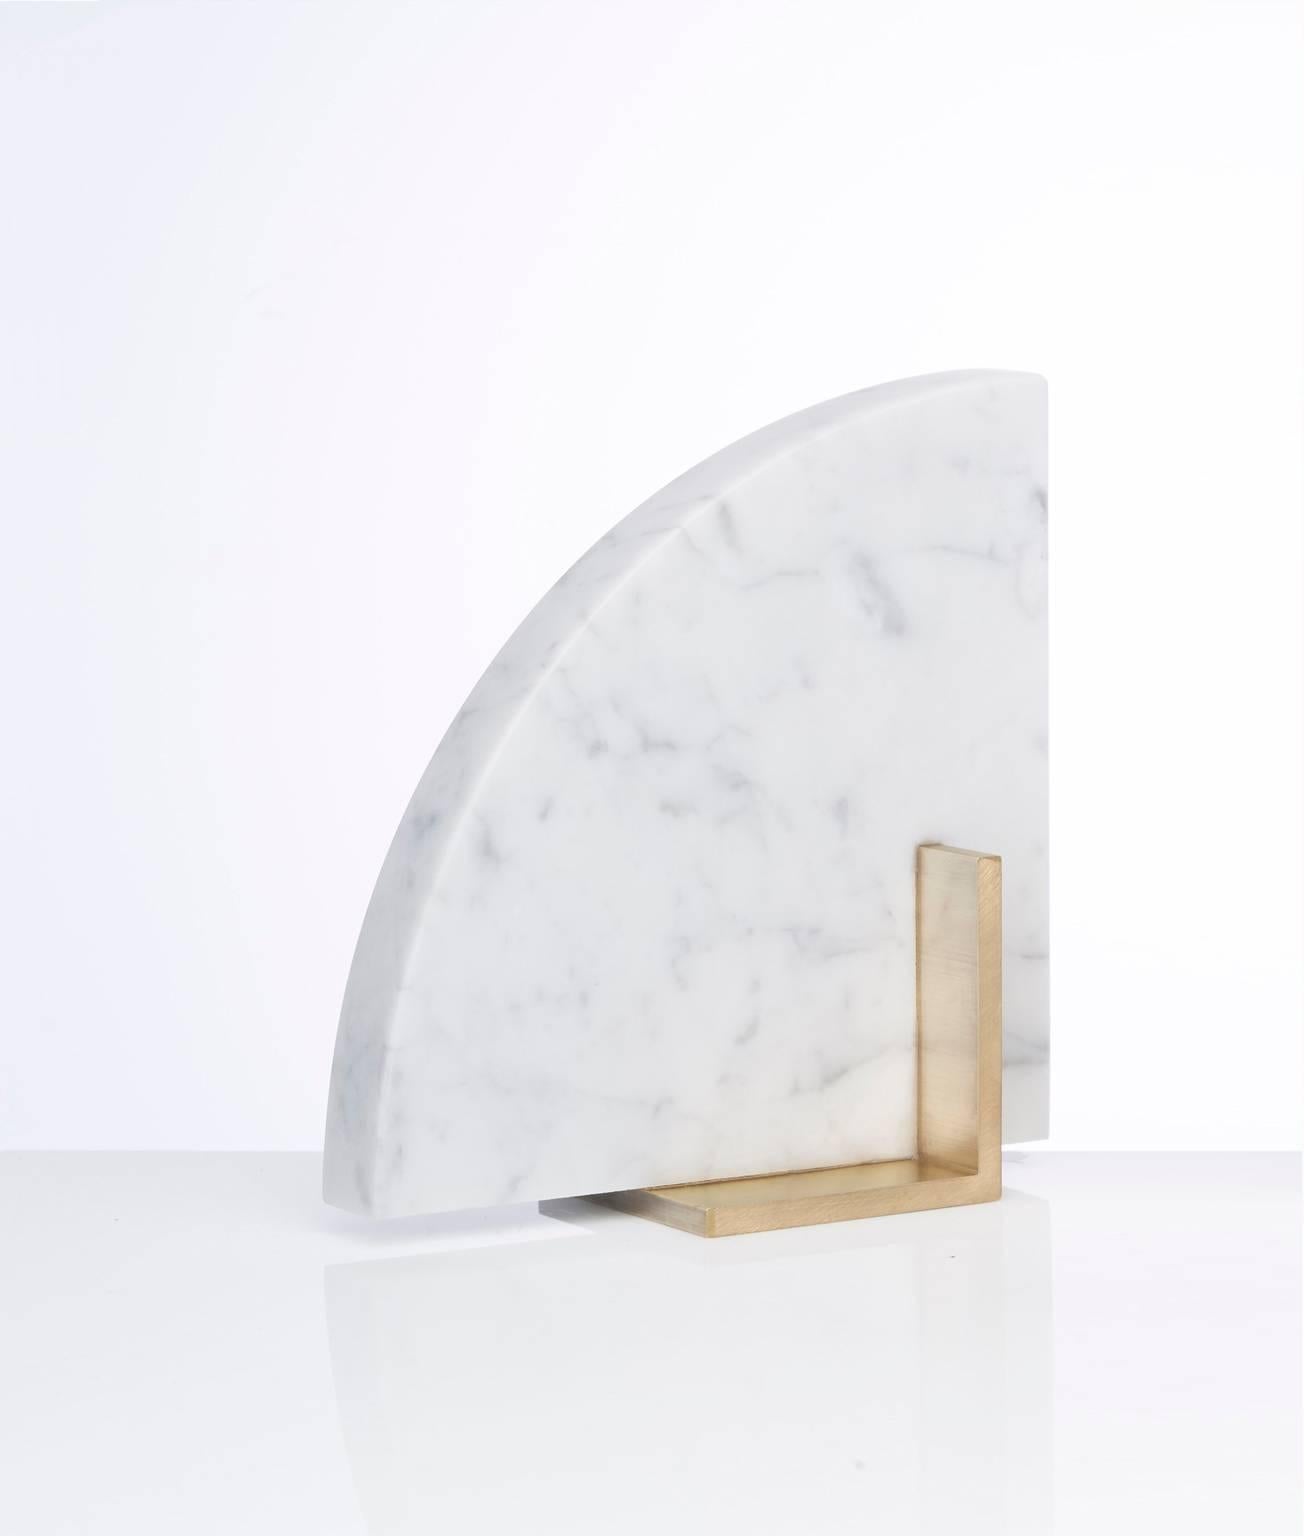 Meet Curvy; one half of the odd couple bookends set which are now available to buy individually. You can now mix and match colors and shapes.
Curvy is available in Carrara marble and a brushed brass base.
The marble is cut into a geometric shape,